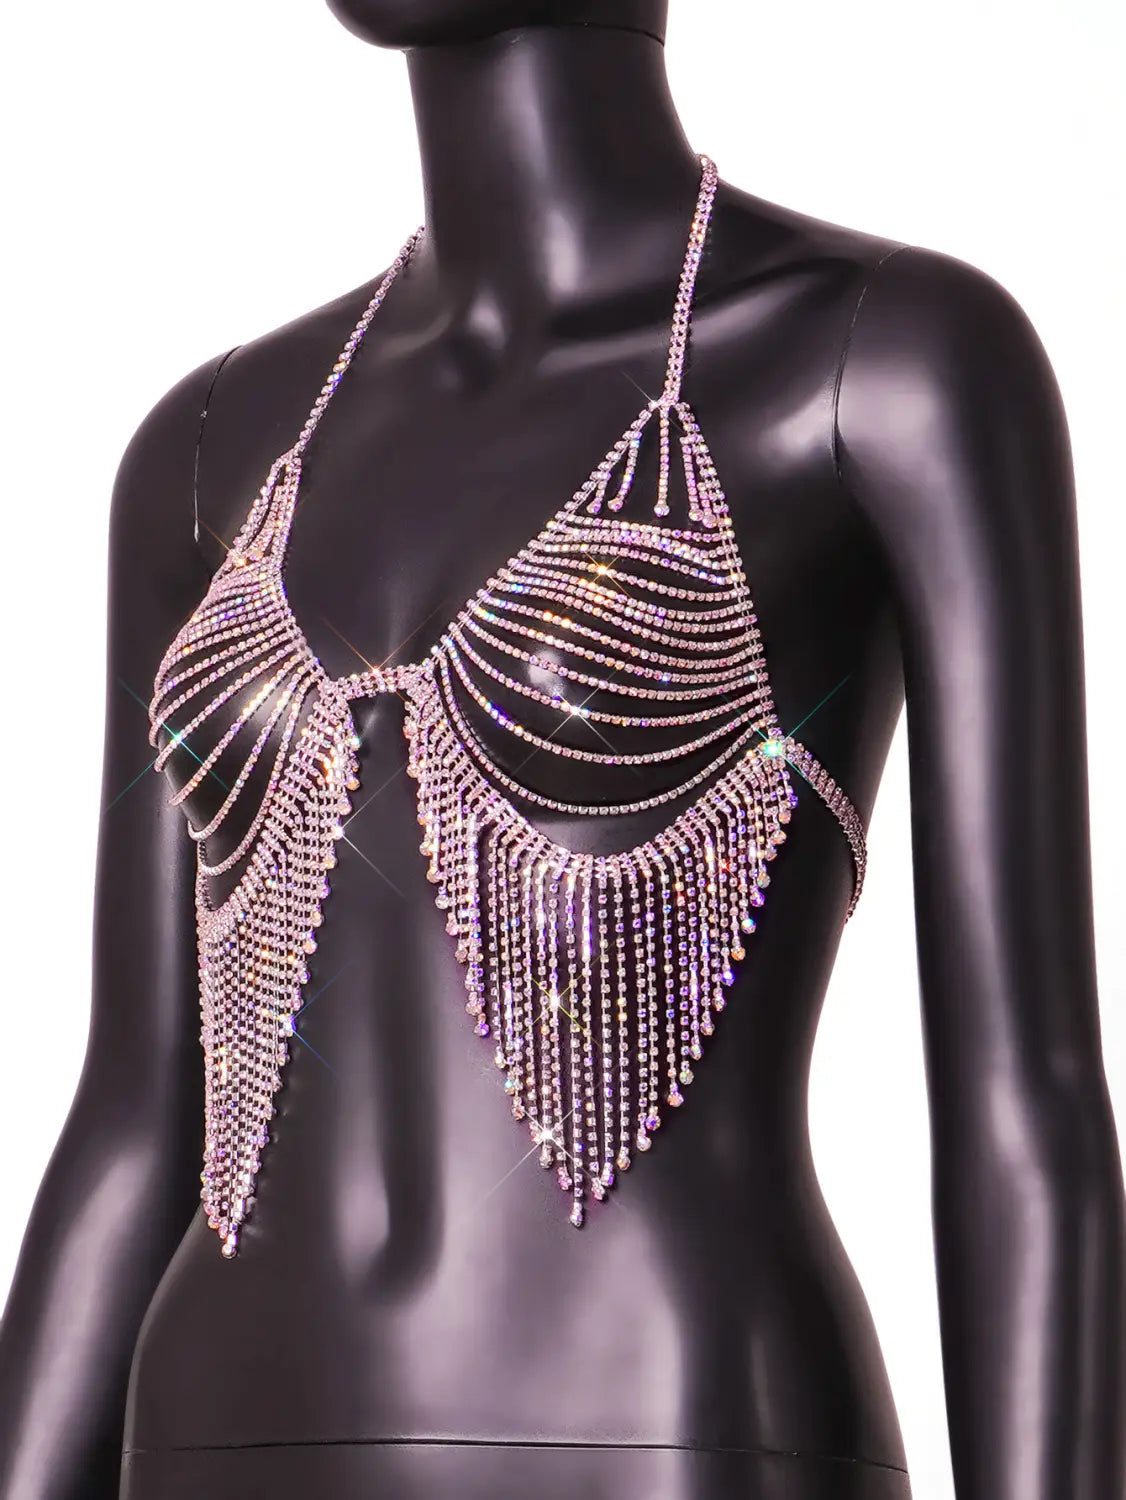 Sequin Halter Tank - Flaunt Your Glamour With a Dazzling Chest Chain